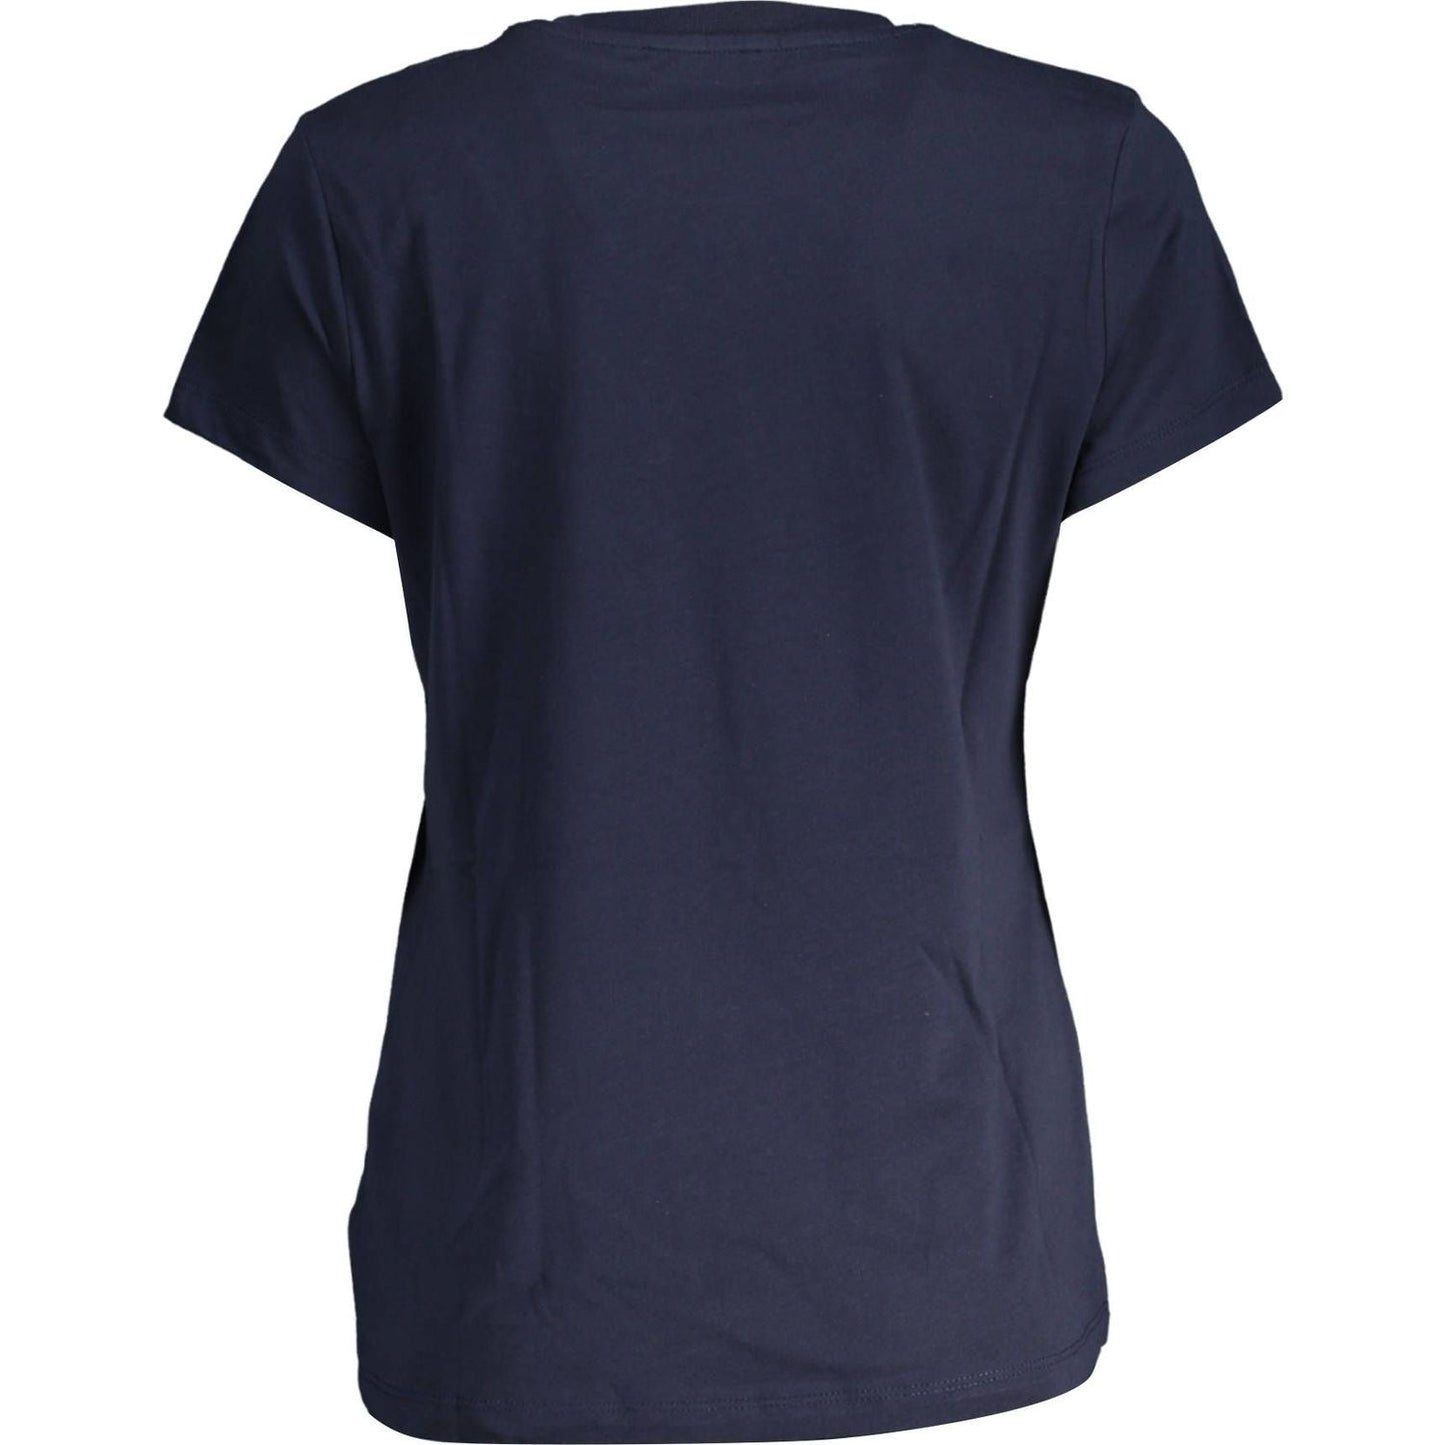 North Sails Chic Blue Organic Cotton Tee with Signature Embroidery chic-blue-organic-cotton-tee-with-signature-embroidery